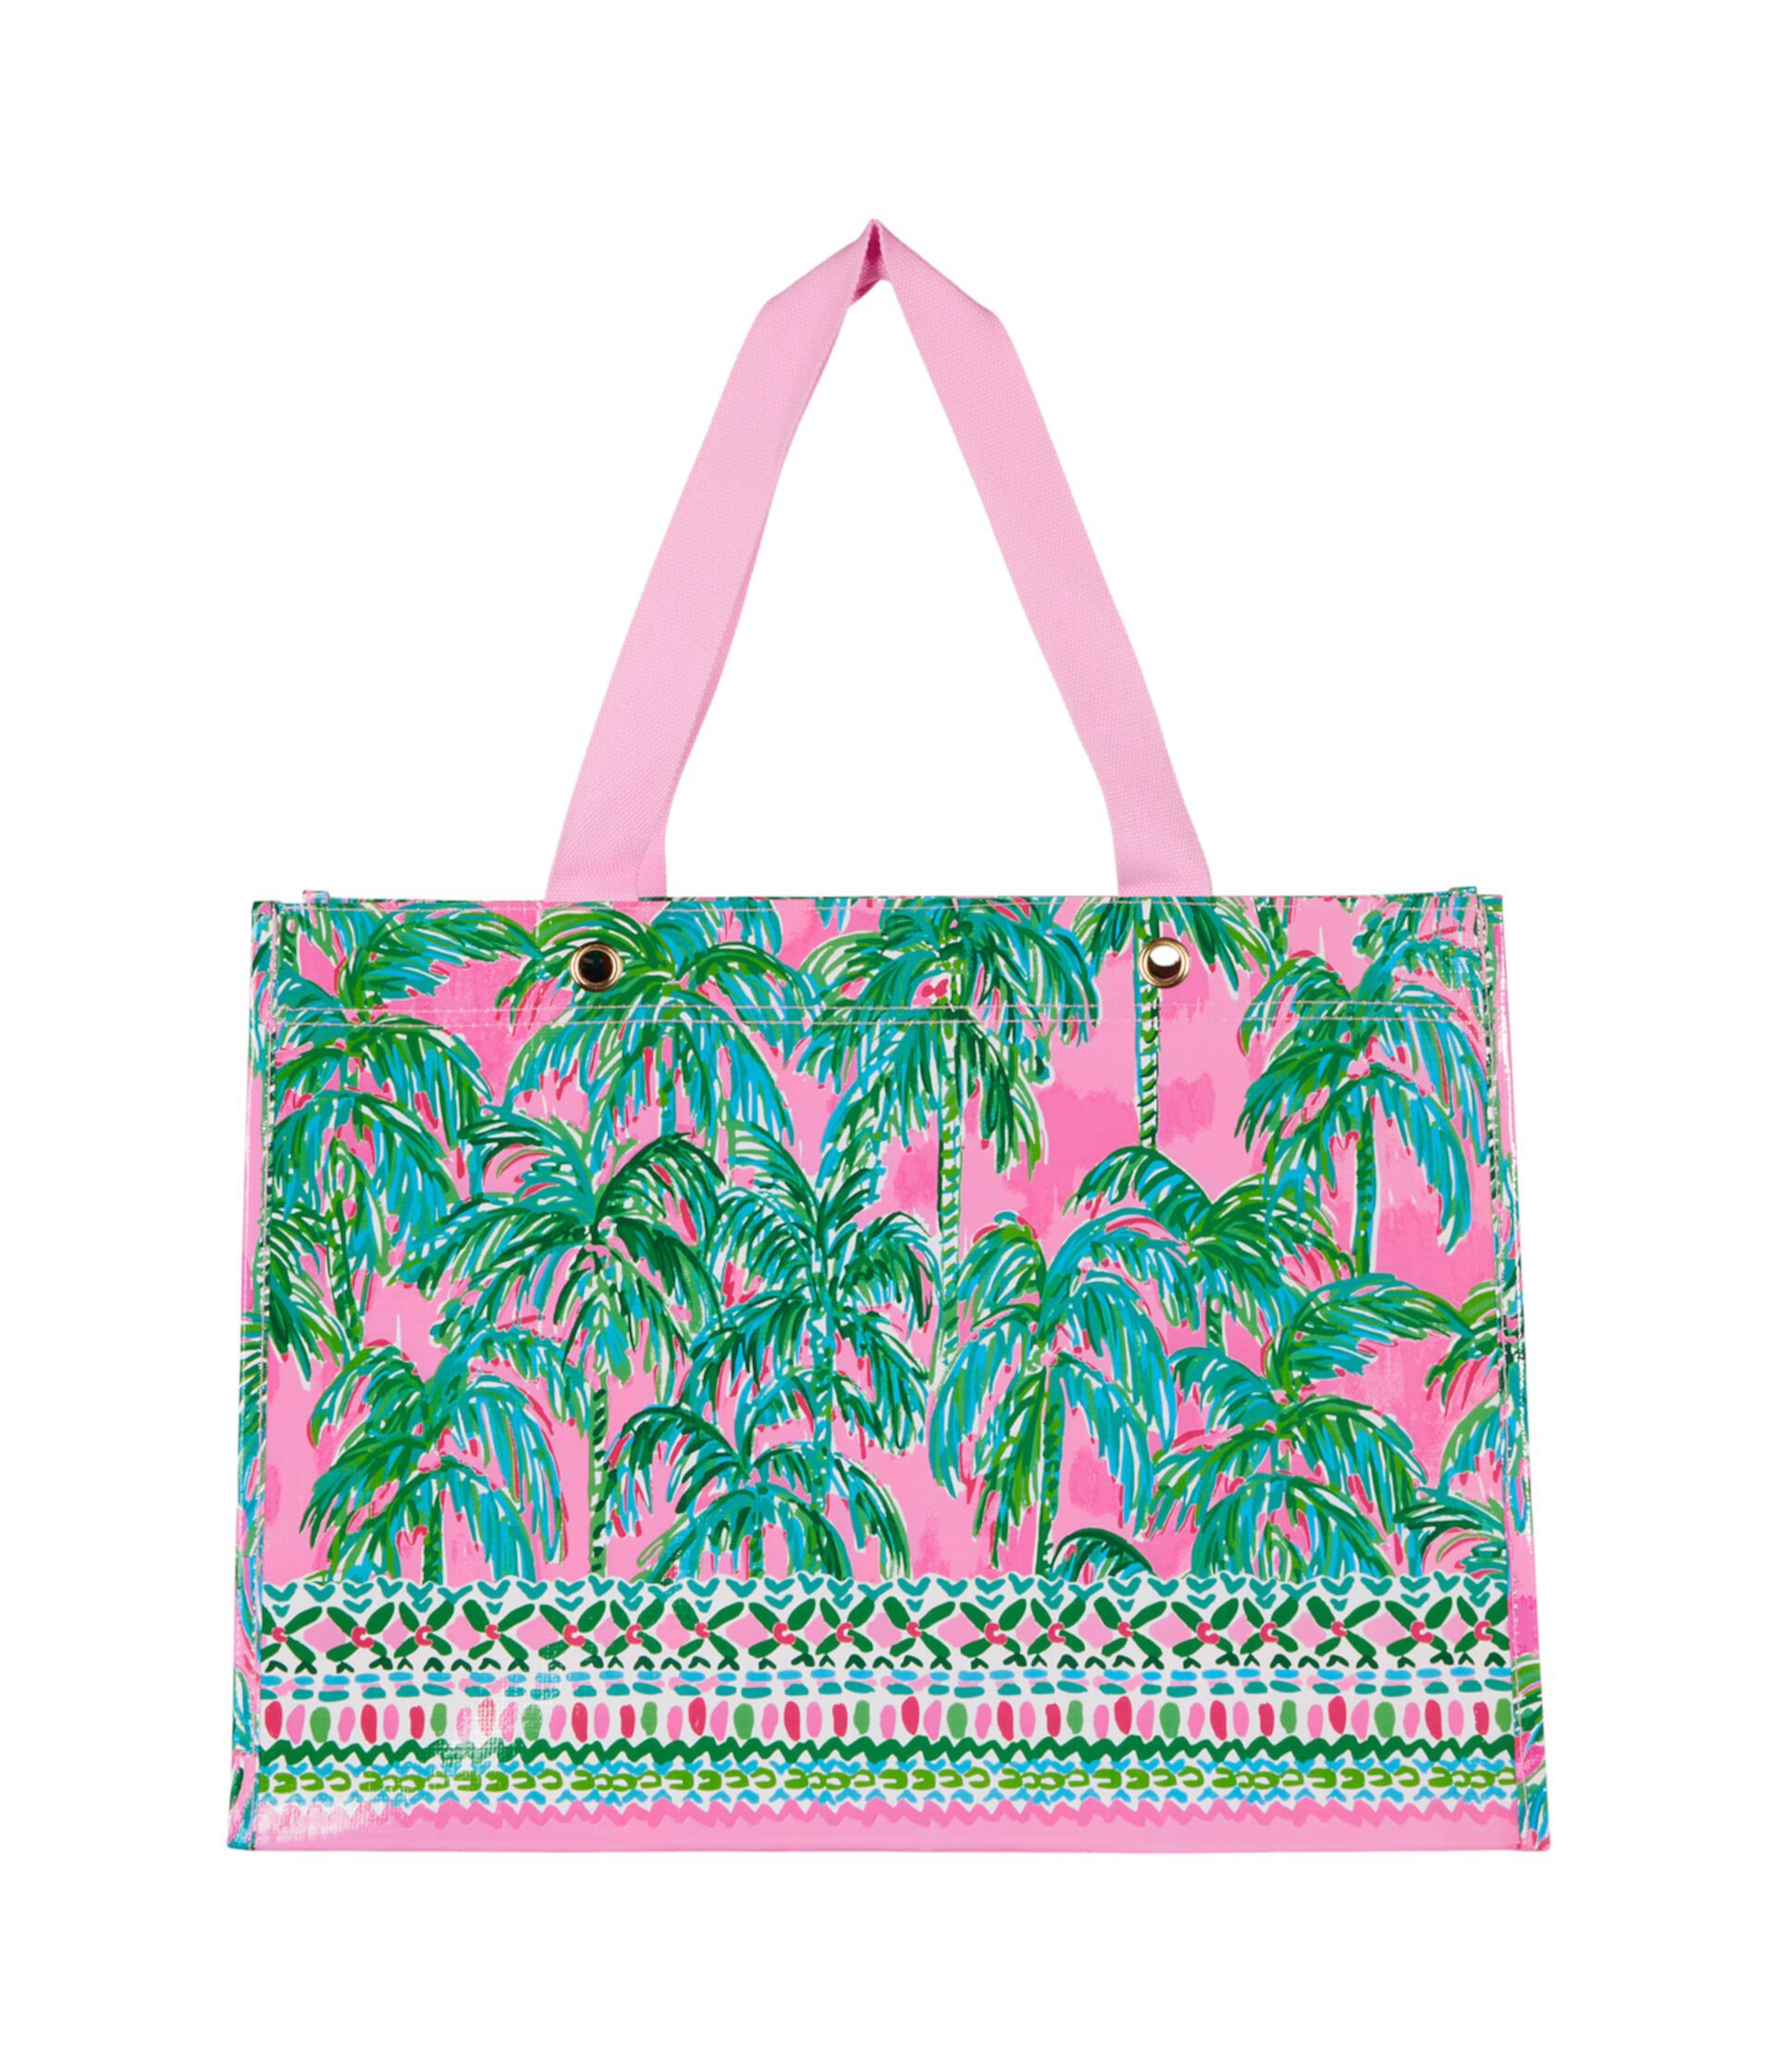 Market Carryall Lilly Pulitzer